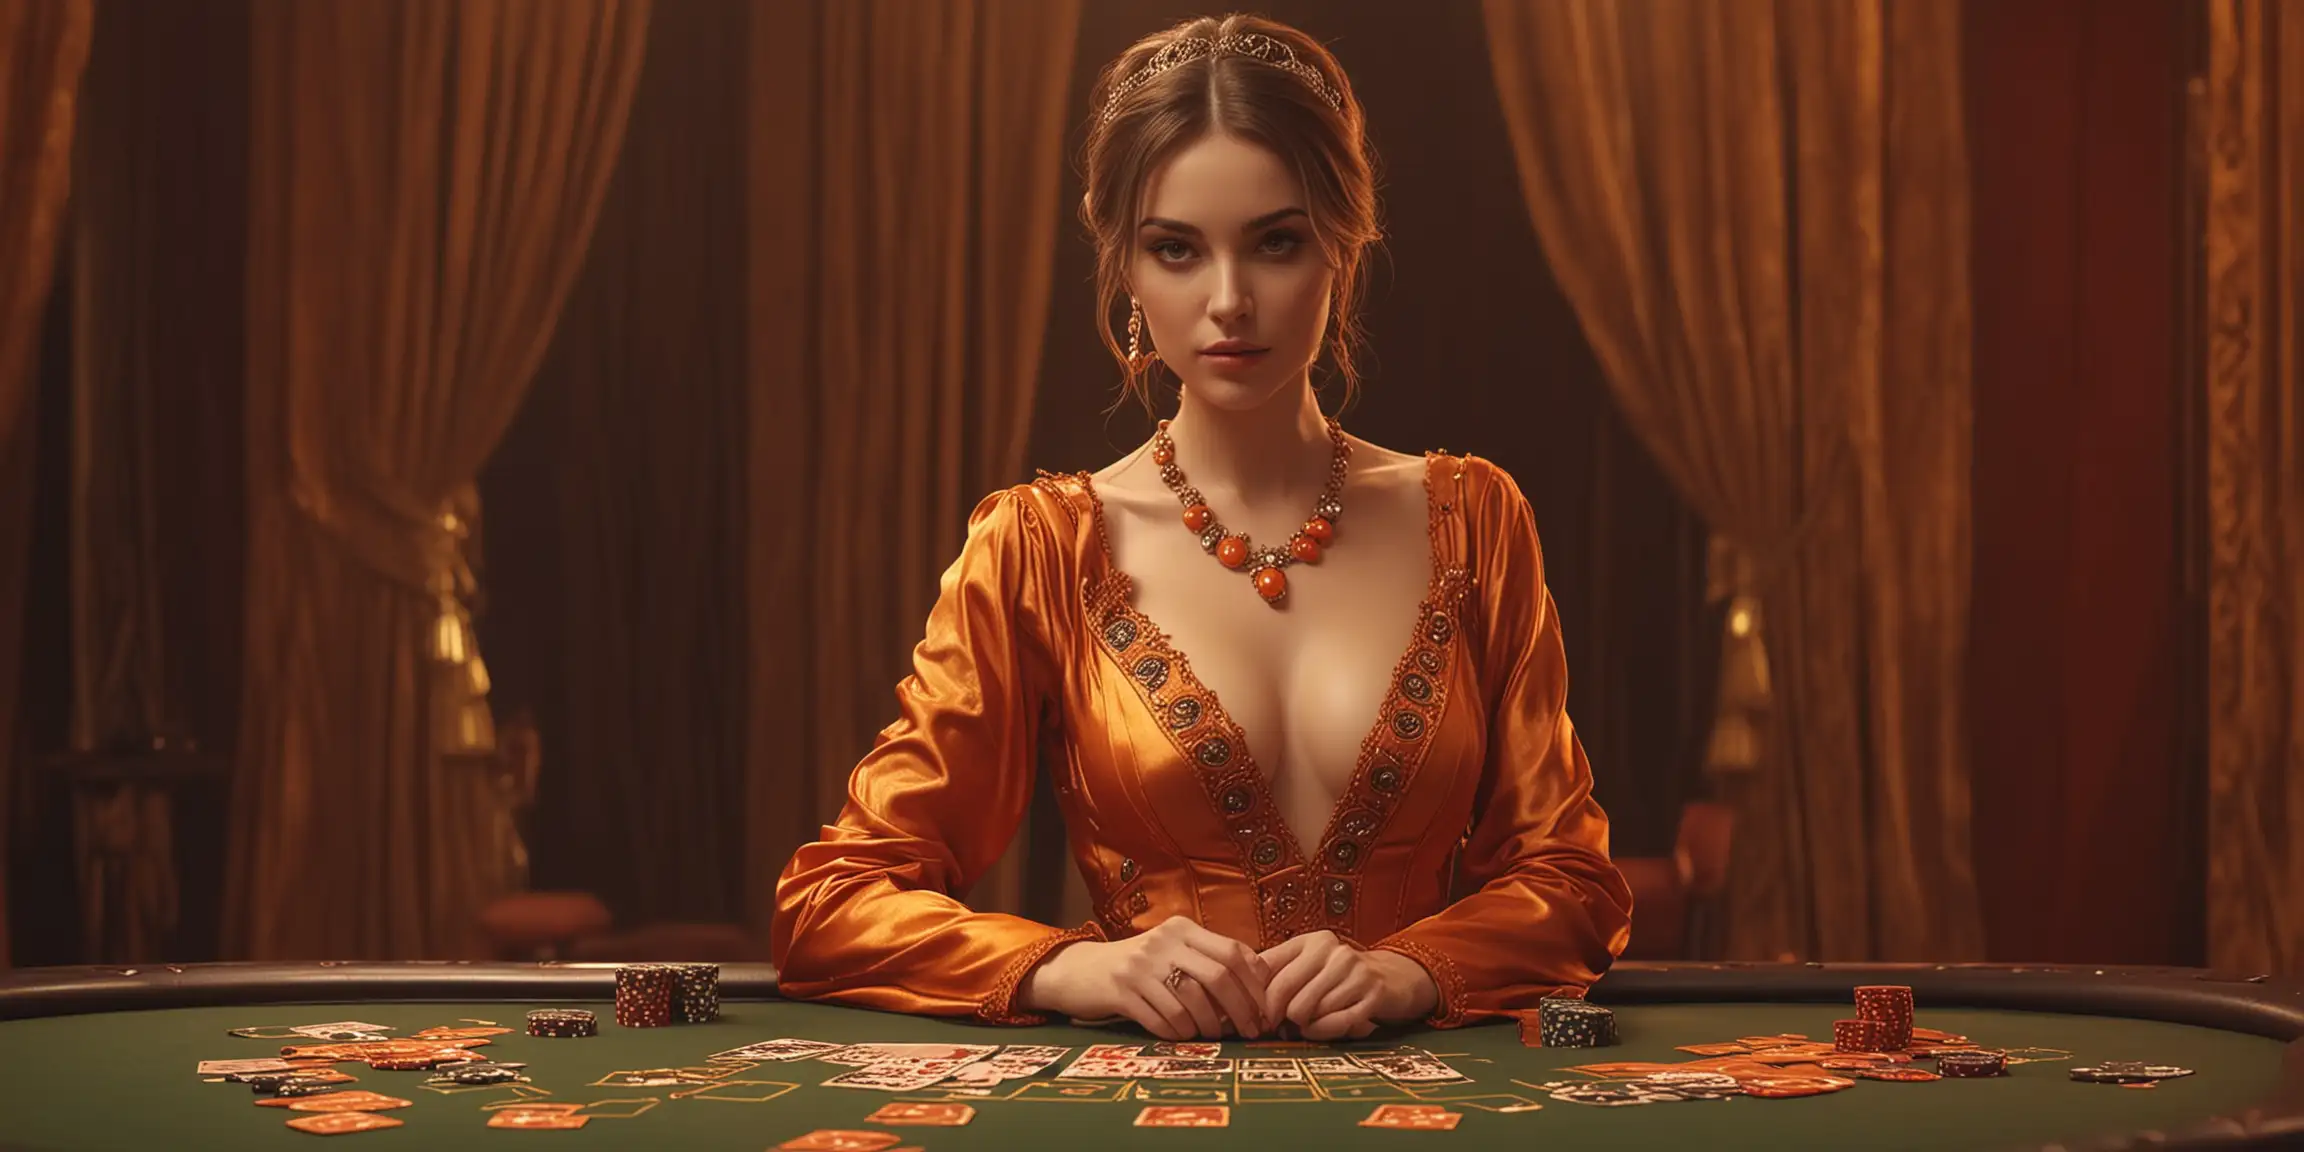 Elegant Woman in Orange Gown with Poker Element Decorations in Technological Atmosphere